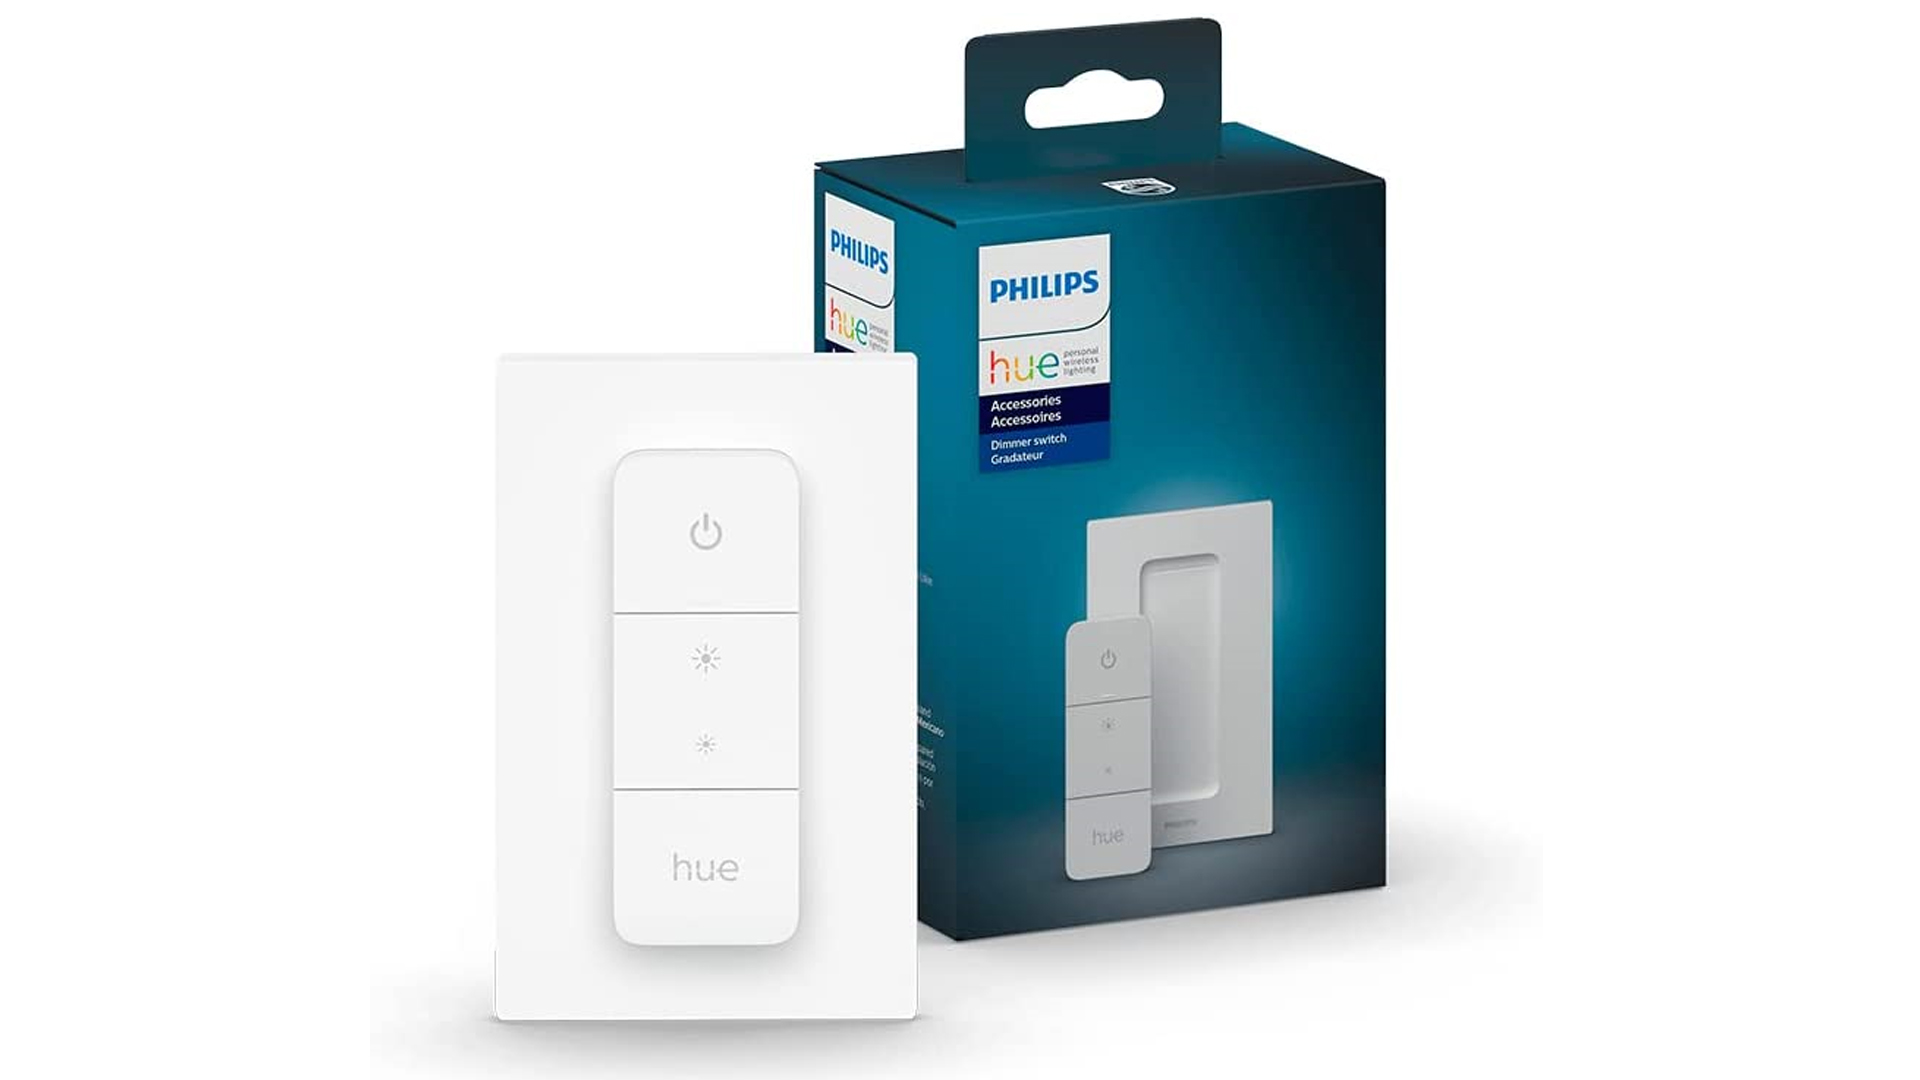 The Philips Hue Smart Dimmer Switch V2